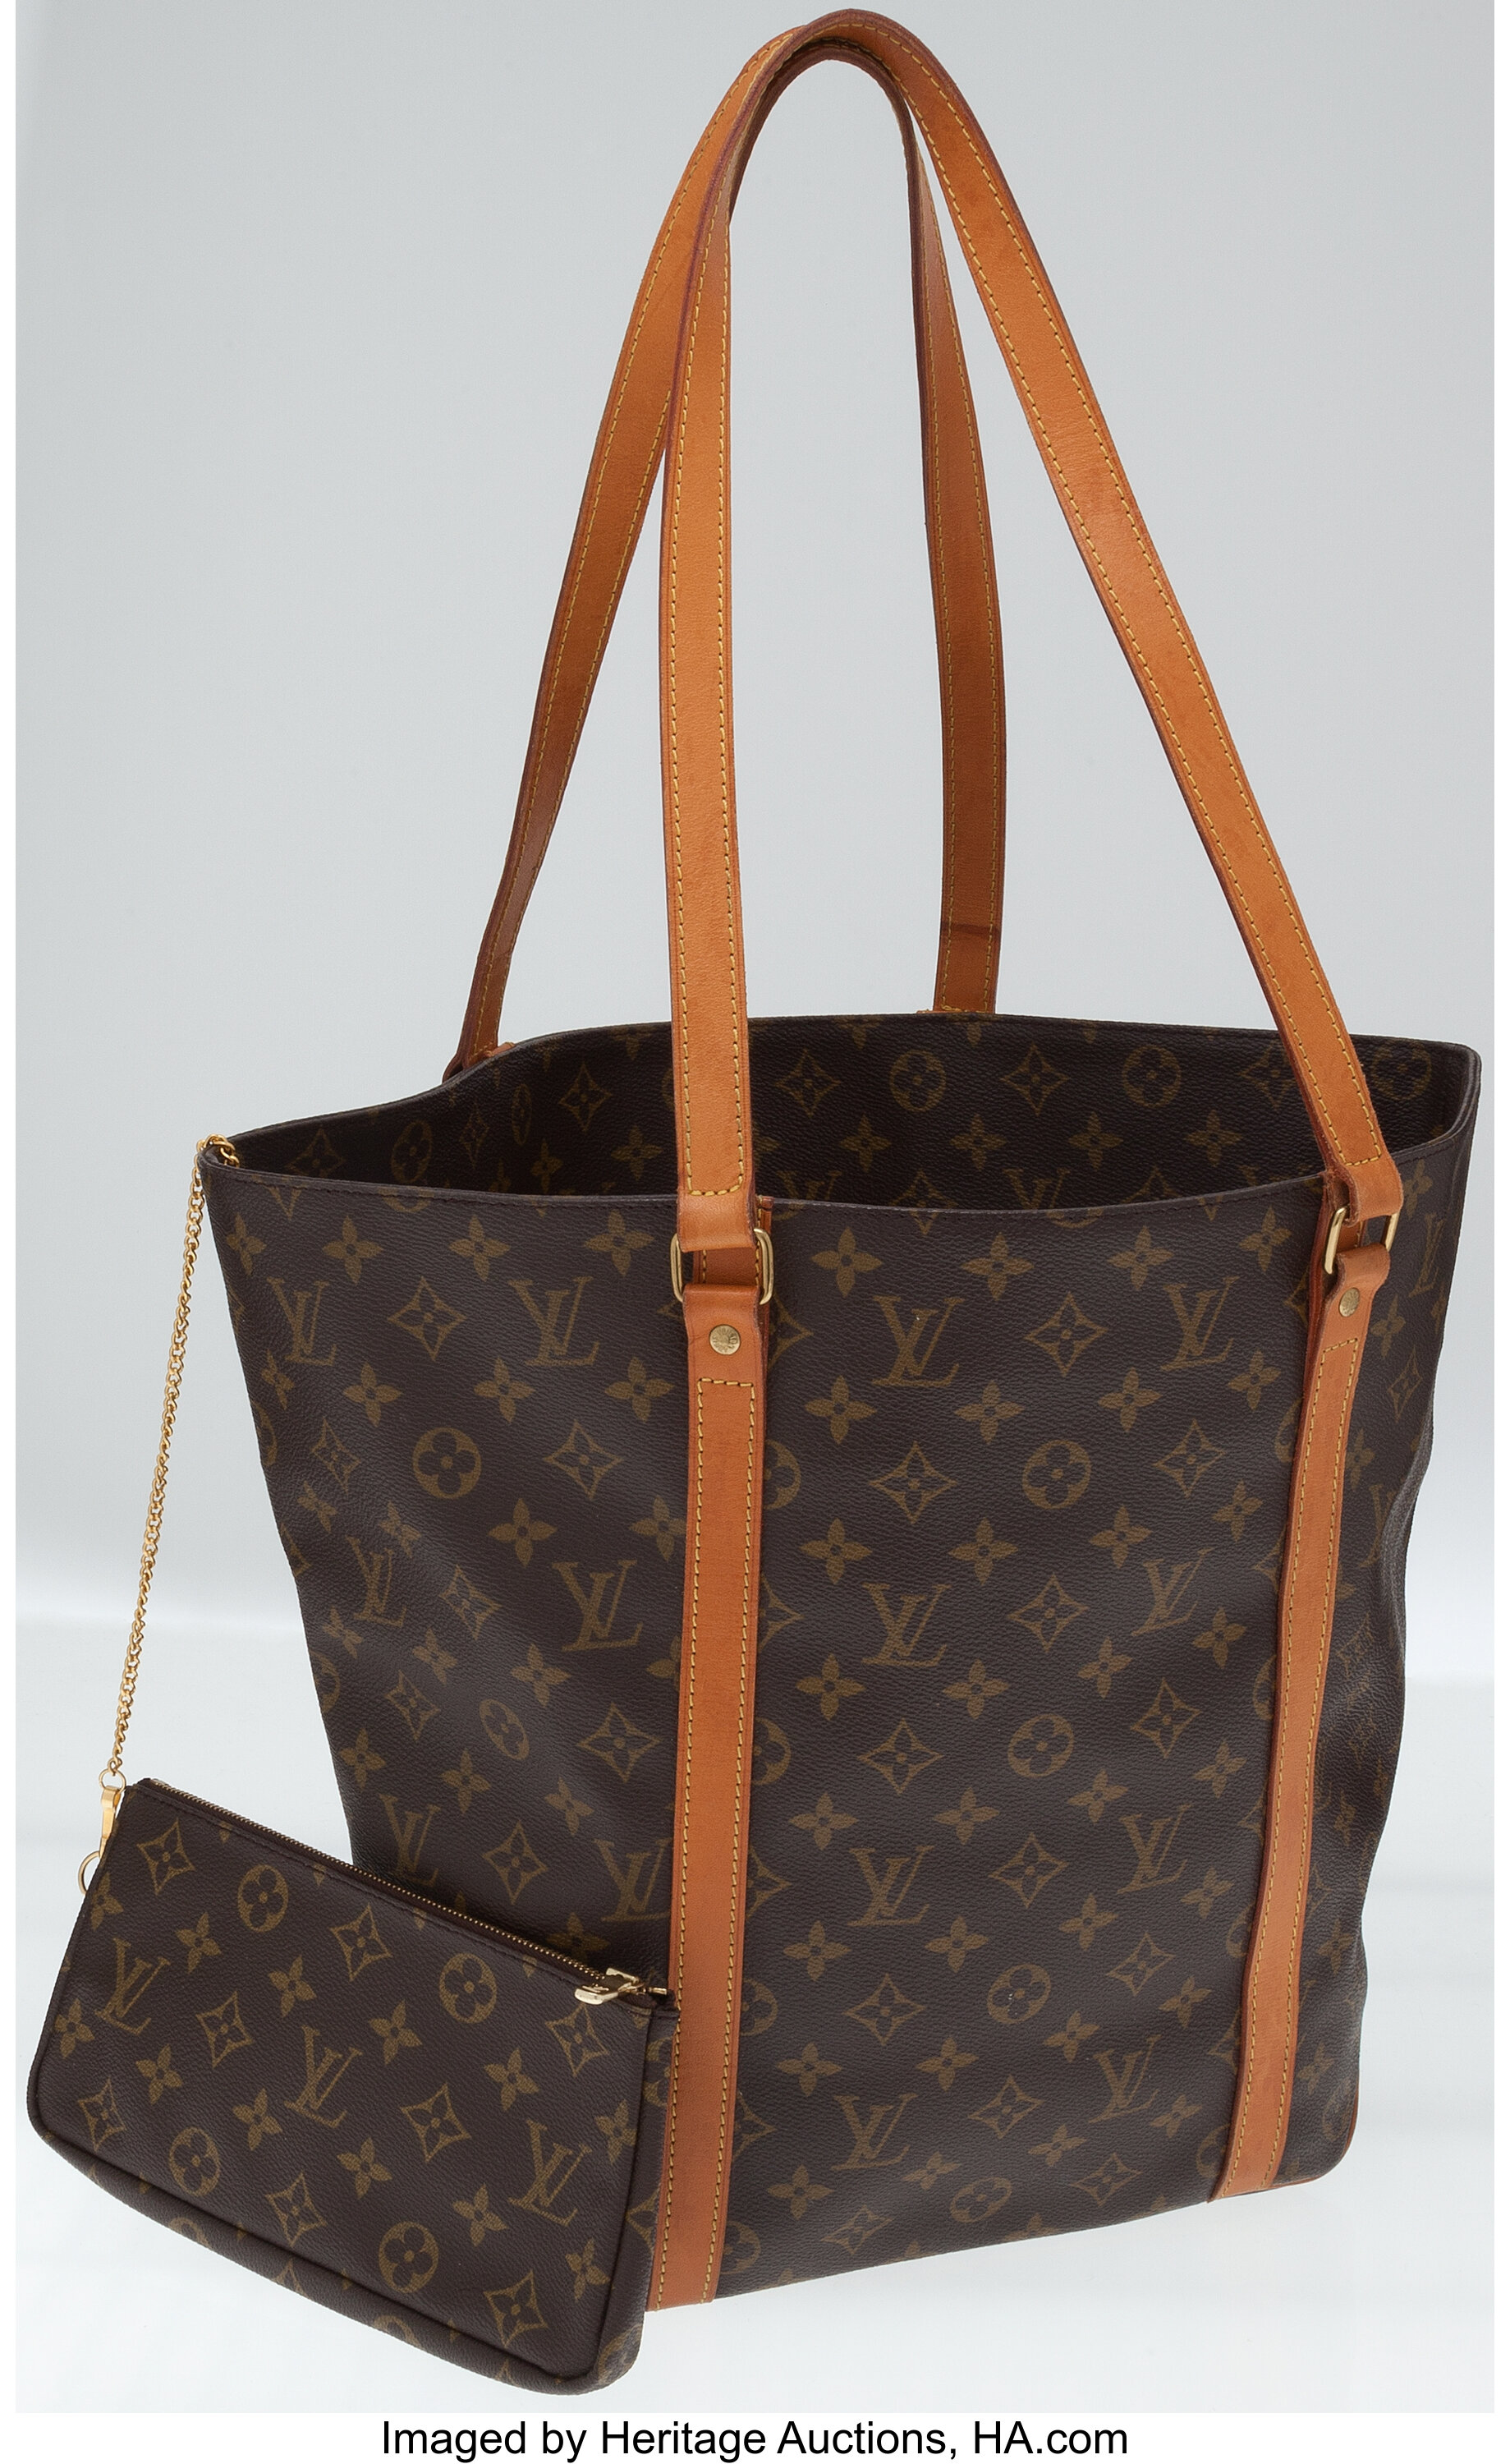 Vuitton Monogram Canvas Sac Shopping Large Tote Bag with Lot #78012 Heritage Auctions